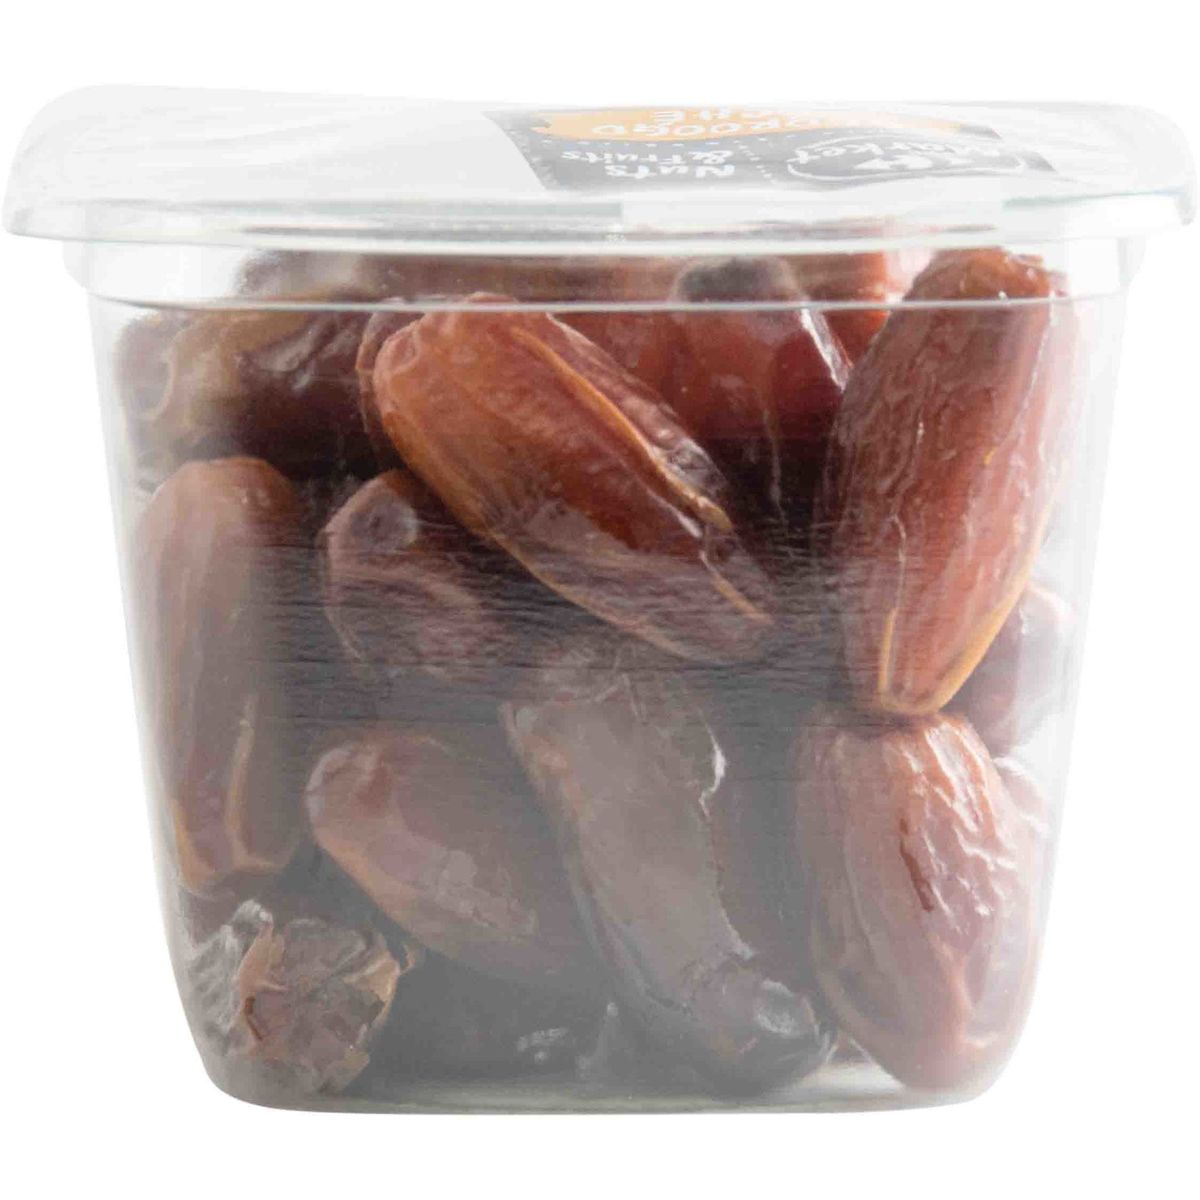 Carrefour Nuts & Fruits Gedroogd Deglet Nour Dadels 250 g